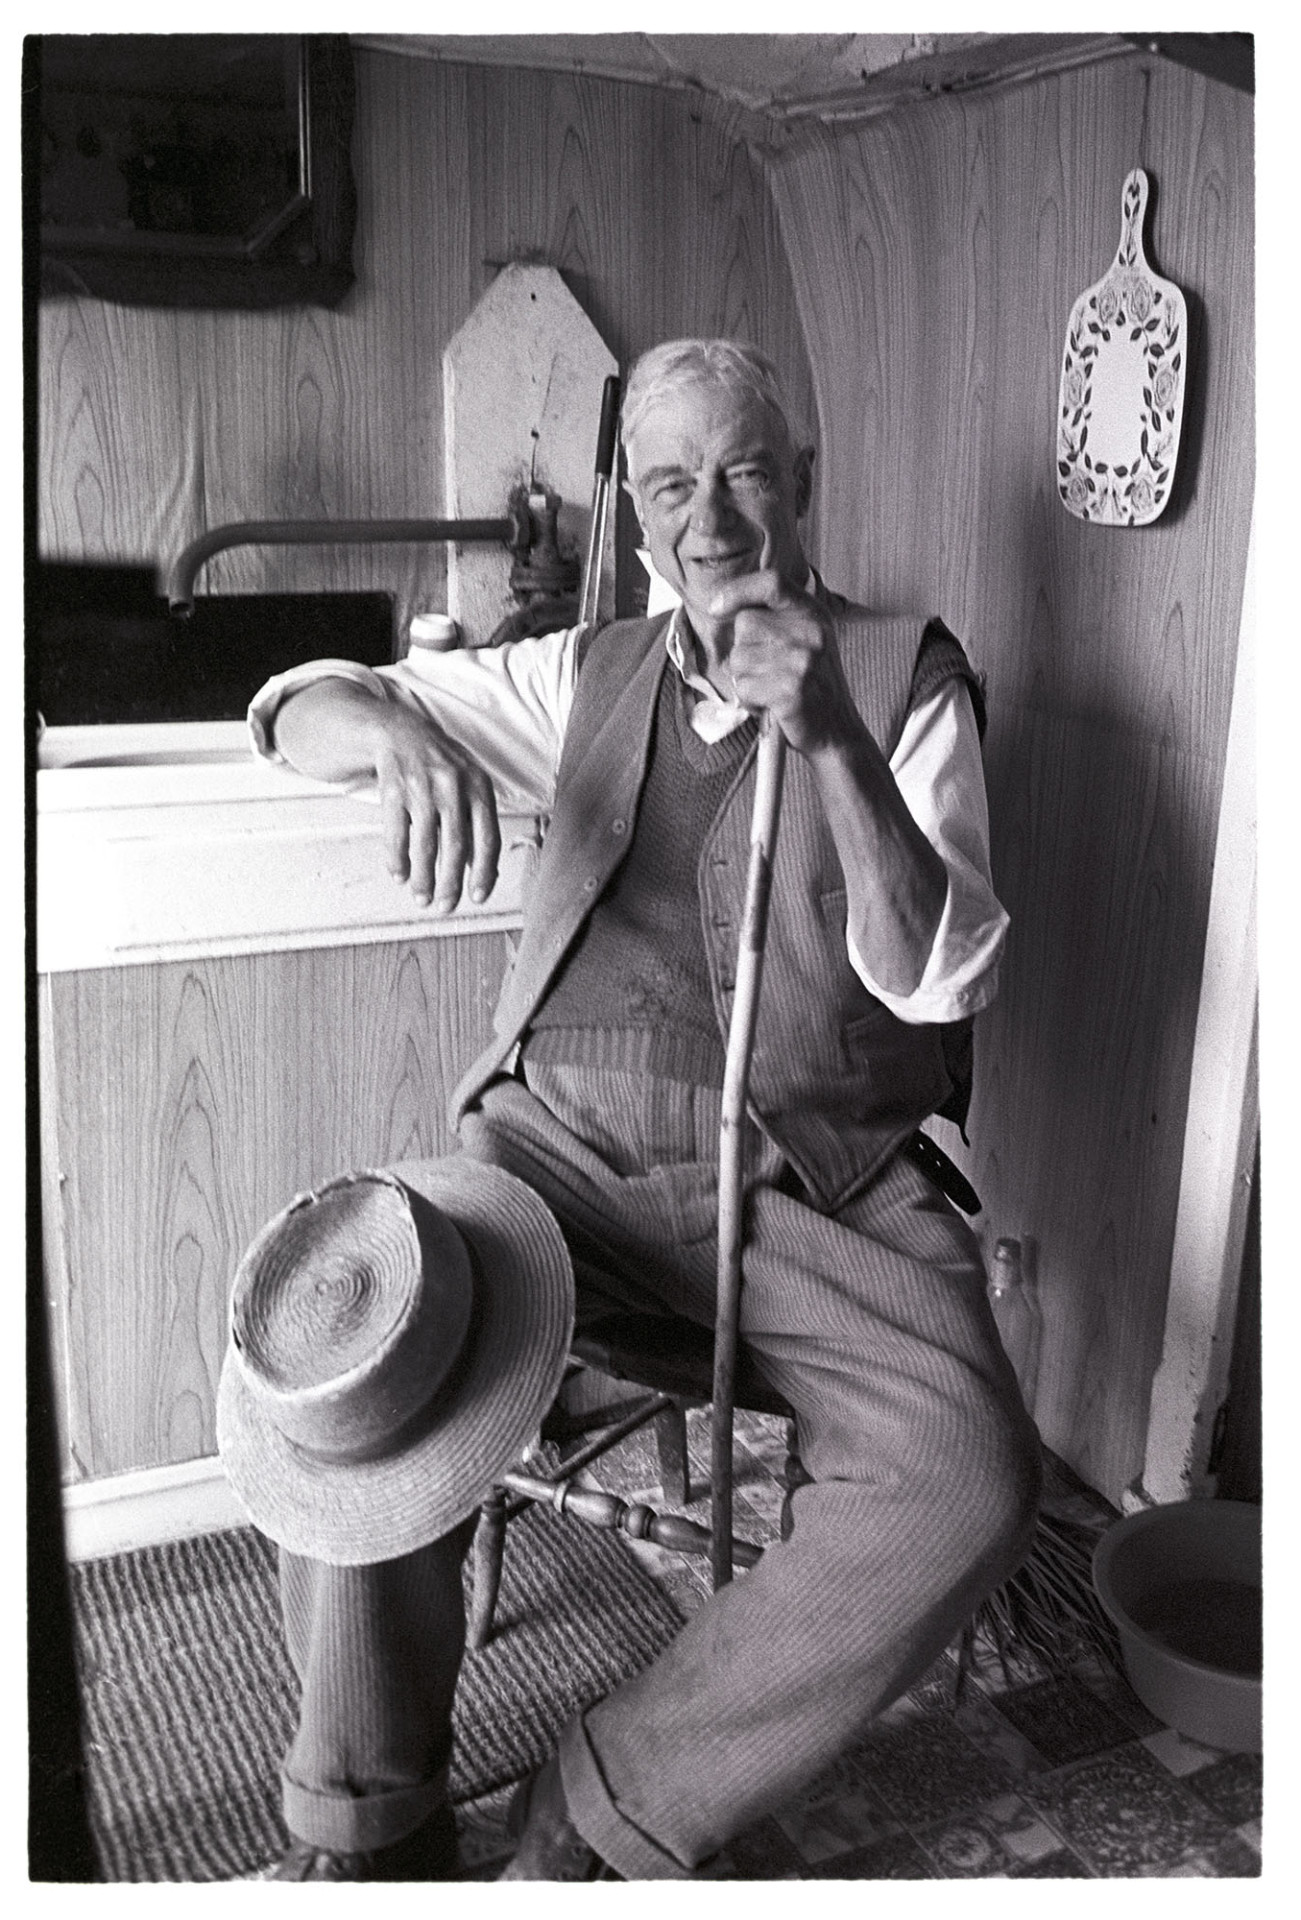 Man seated with hat on knee.
[Mr Crocker sitting in the kitchen at Deckport Farm, Hatherleigh holding a walking stick and with a hat on his knee.]